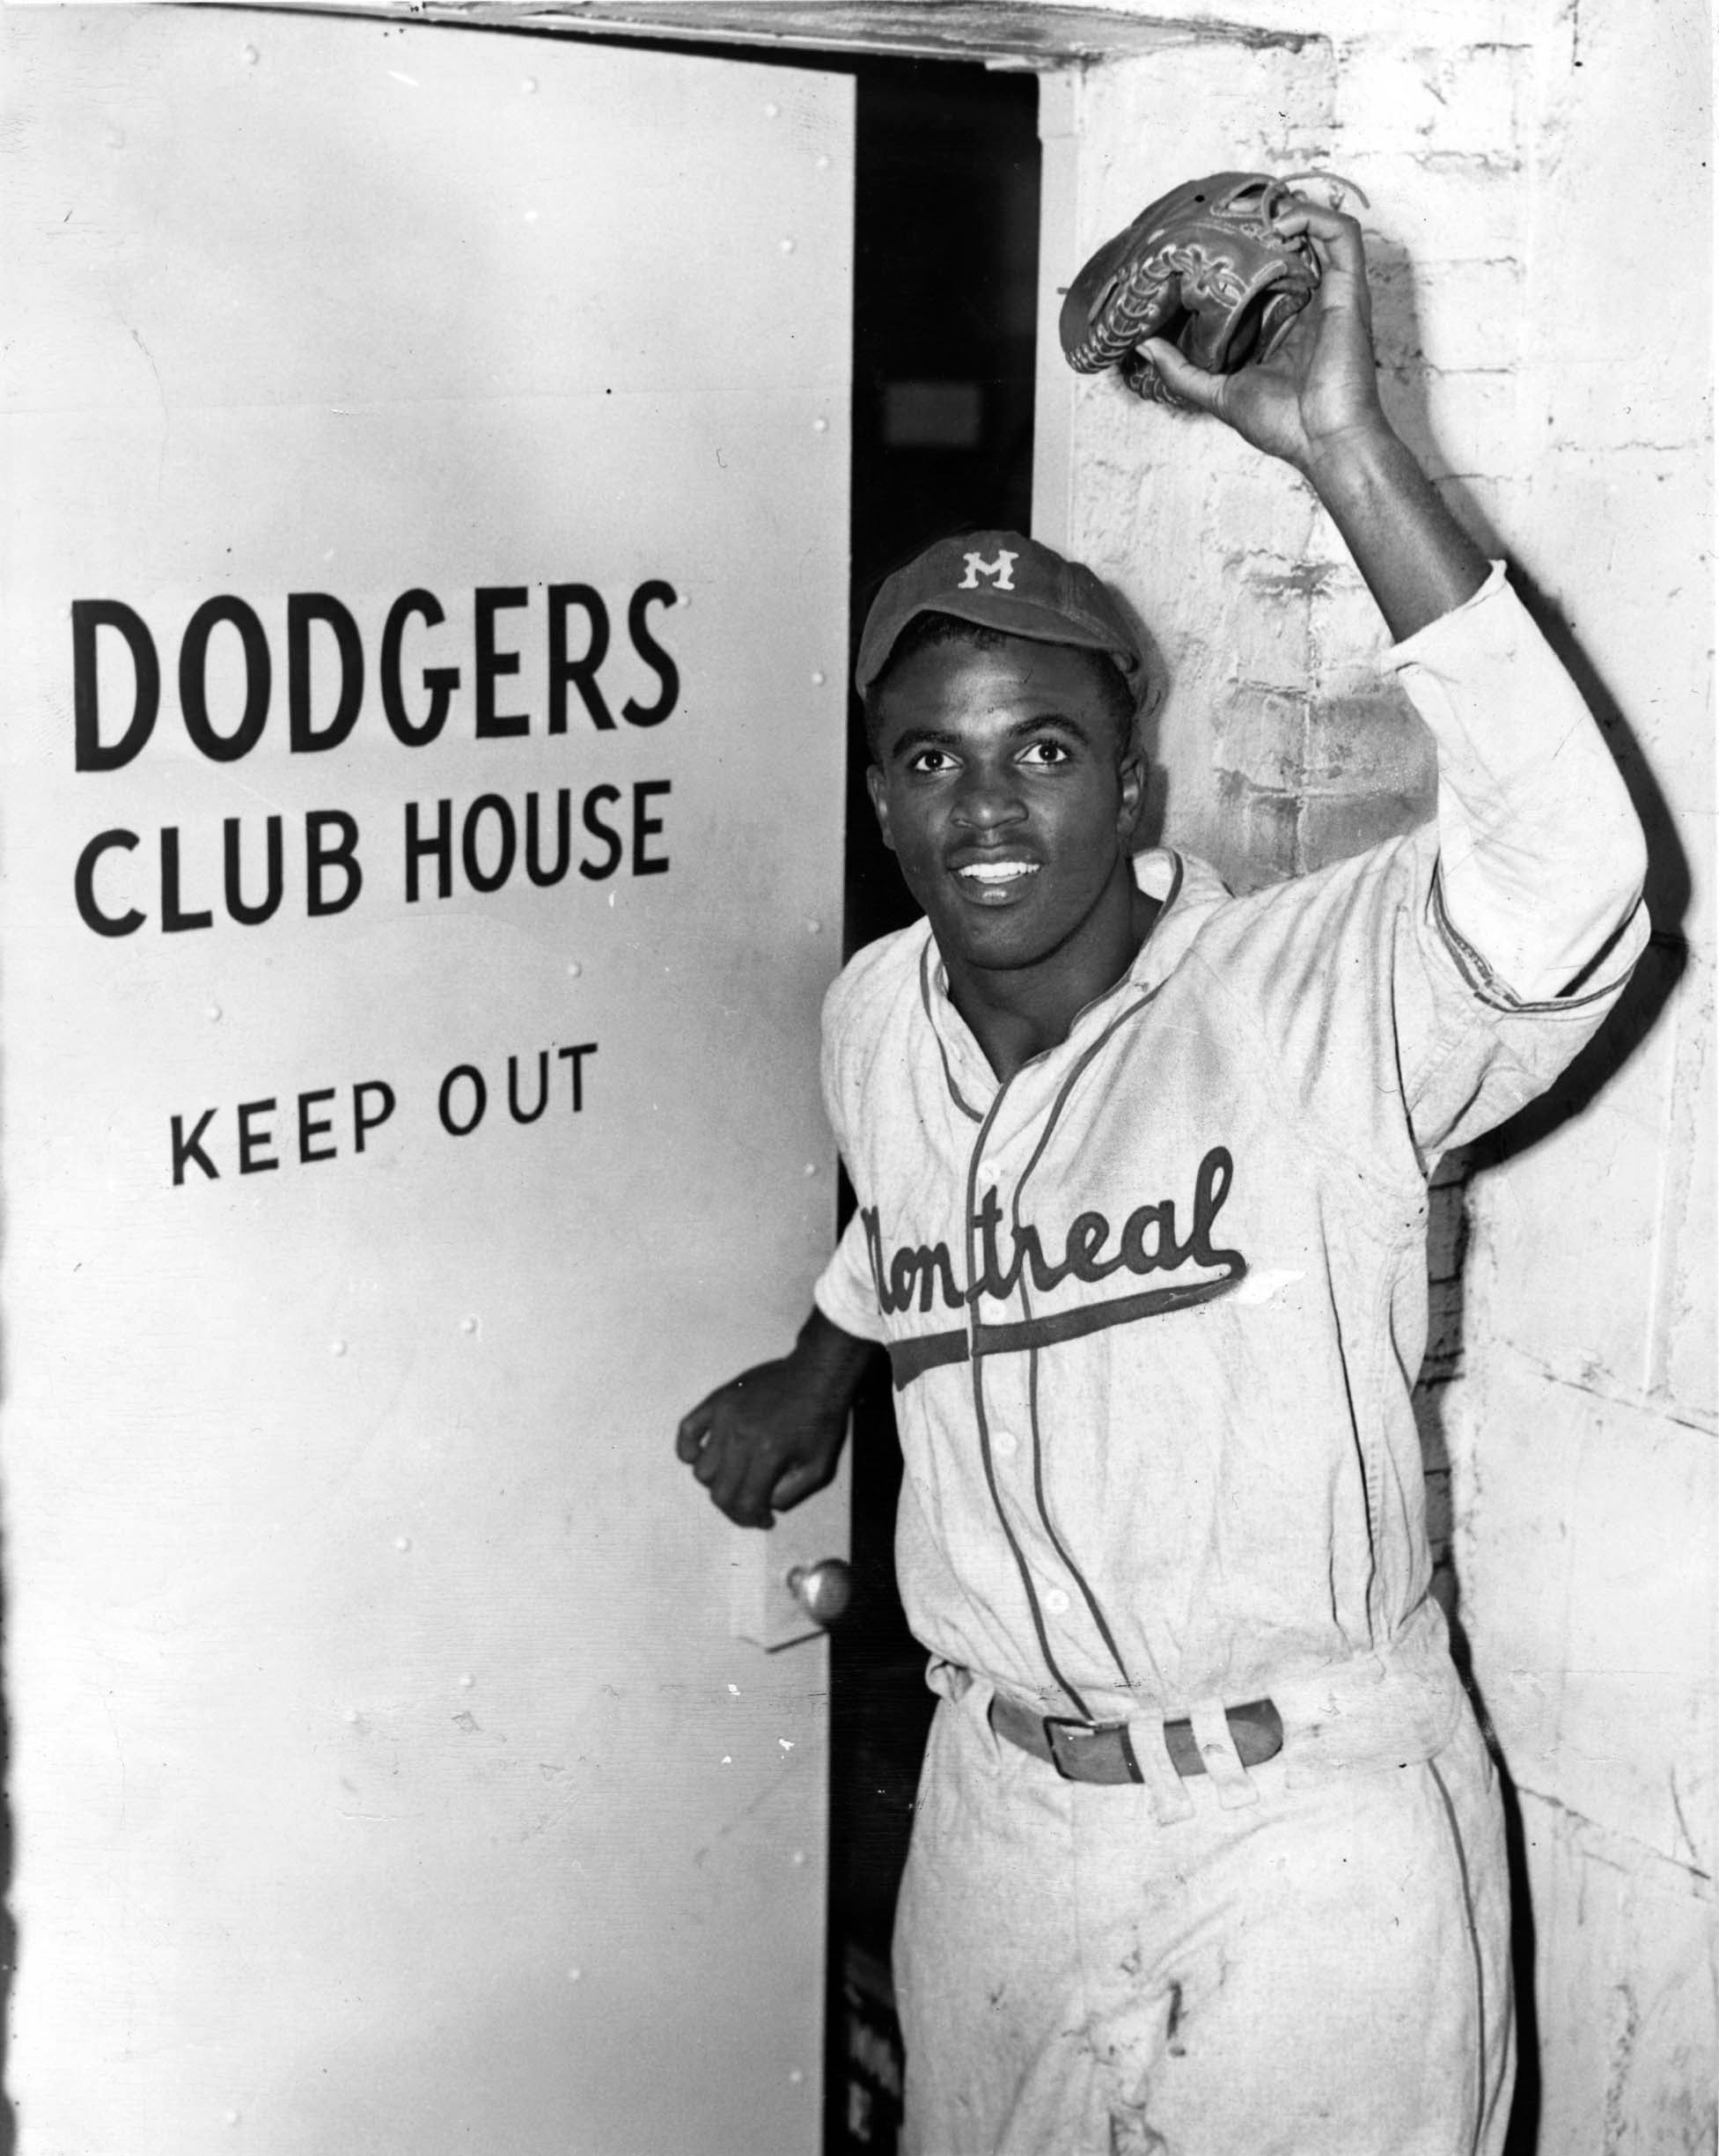 Jackie Robinson entering the Dodgers clubhouse.